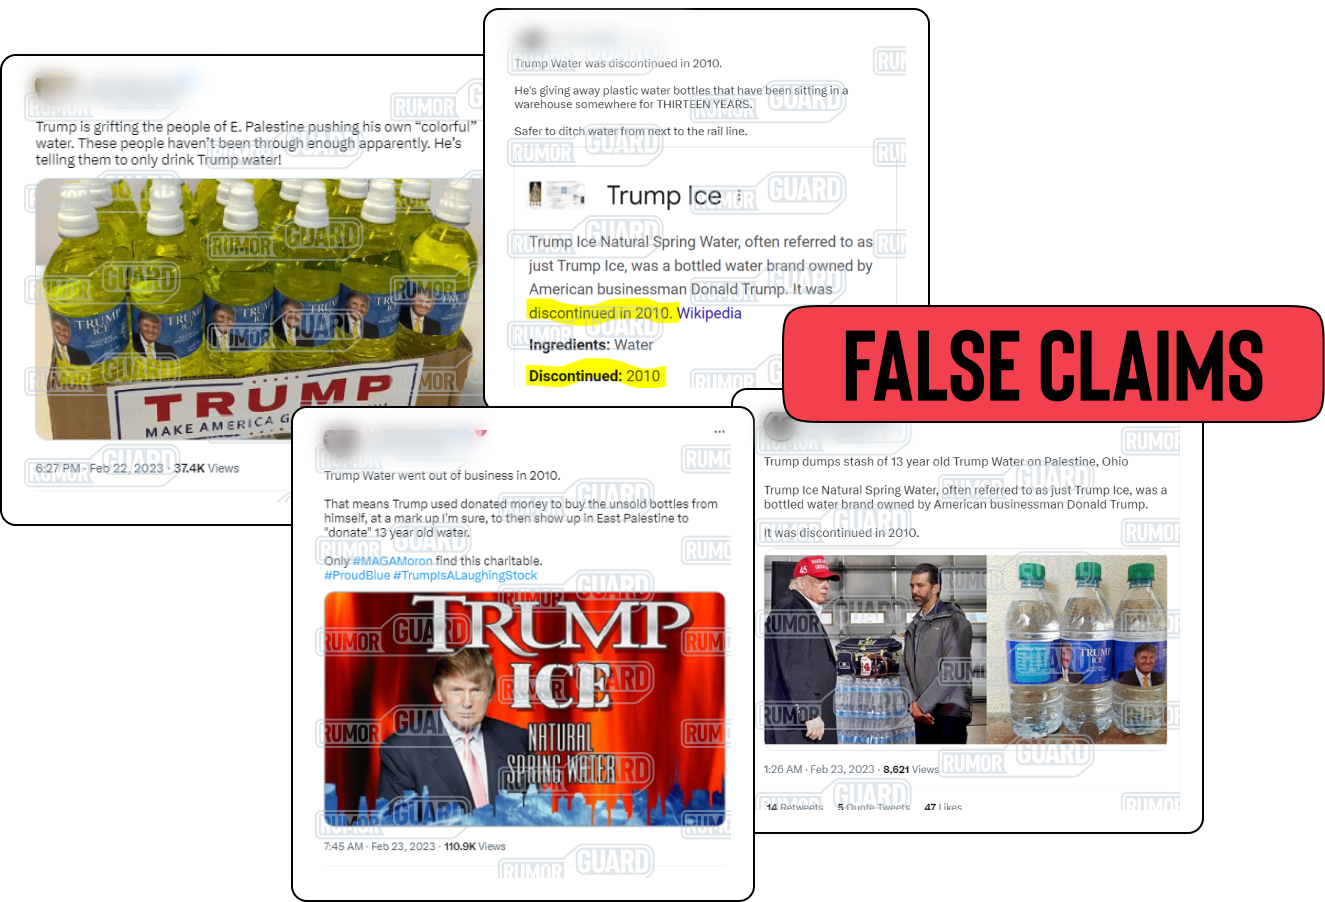 Four tweets contain messages claiming that former U.S. President Donald Trump handed out expired bottles of “Trump Ice” water to the residents of East Palestine, Ohio, after the derailment of a freight train carrying hazardous materials, including one that reads “Trump dumps stash of 13 year old Trump Water on Palestine, Ohio.” The News Literacy Project has added a label that says, “FALSE CLAIMS.”